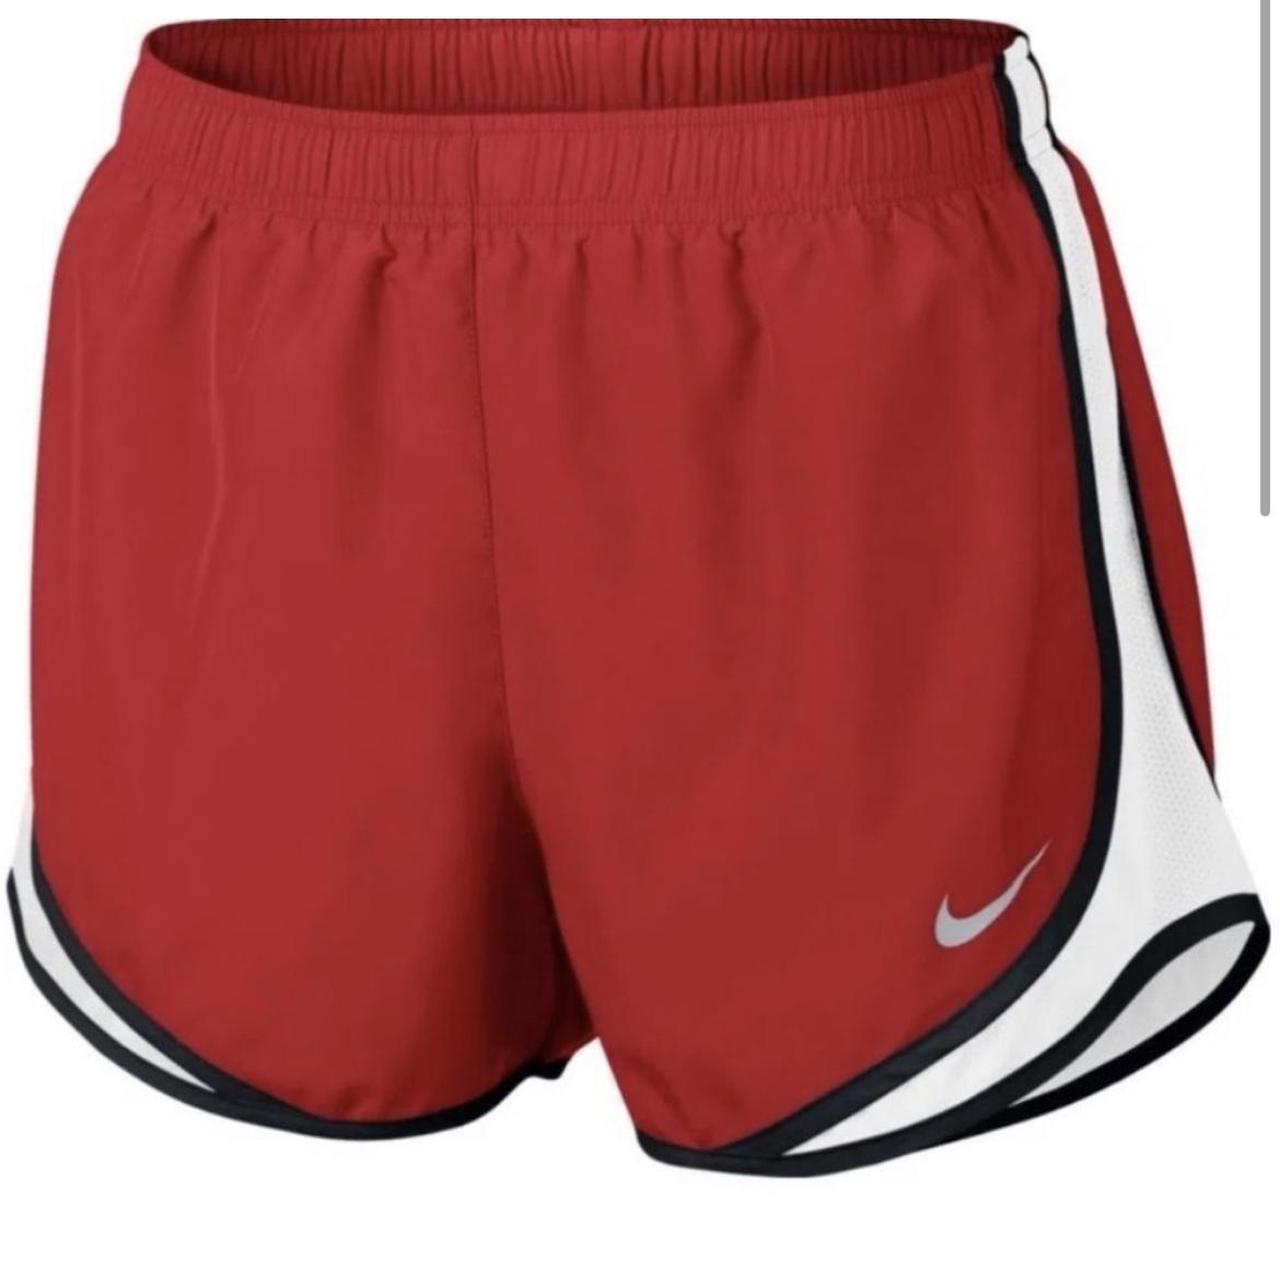 Shorts Womens Size Med Nike Dryfit Red White Black Running Athletic